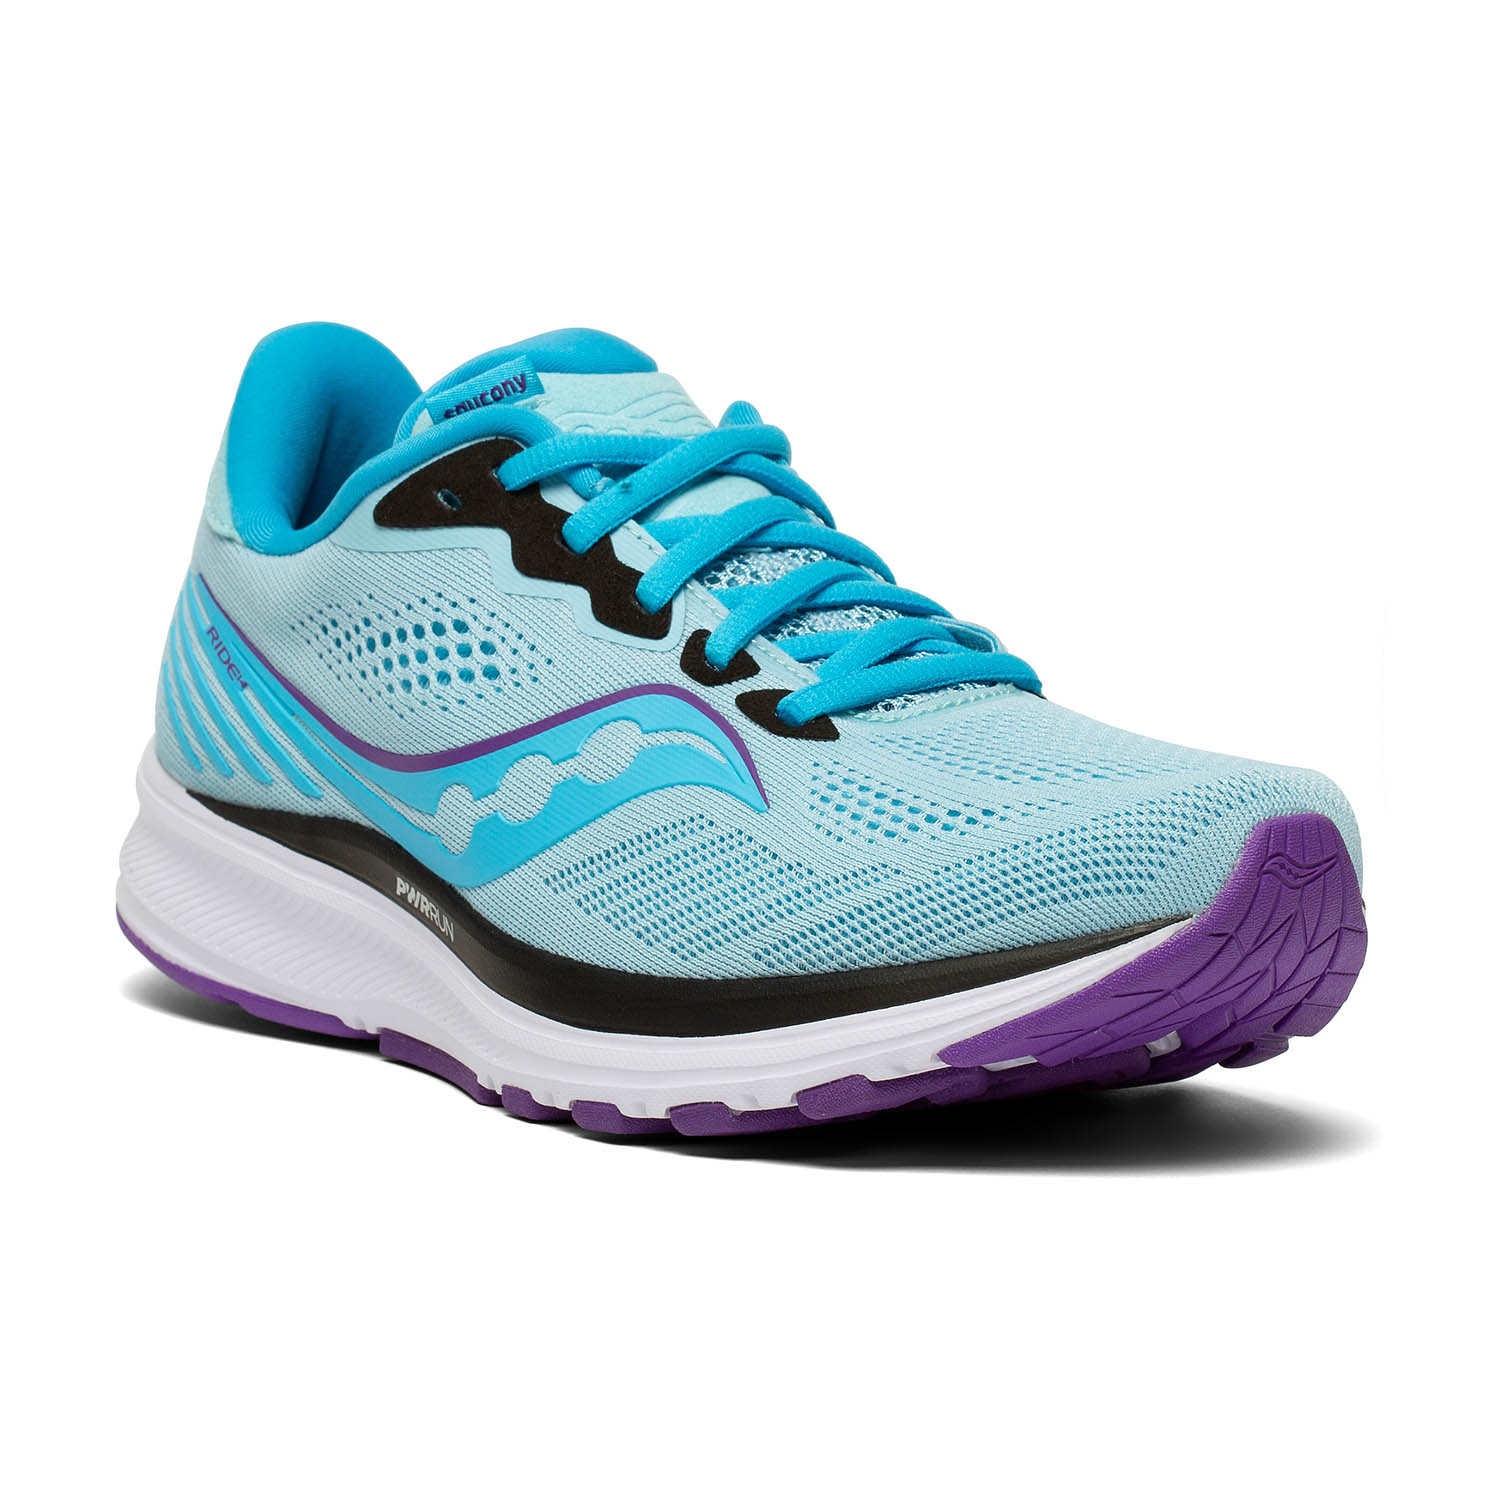 Saucony Ride 14 Women's Running Shoes - Powder/Concord